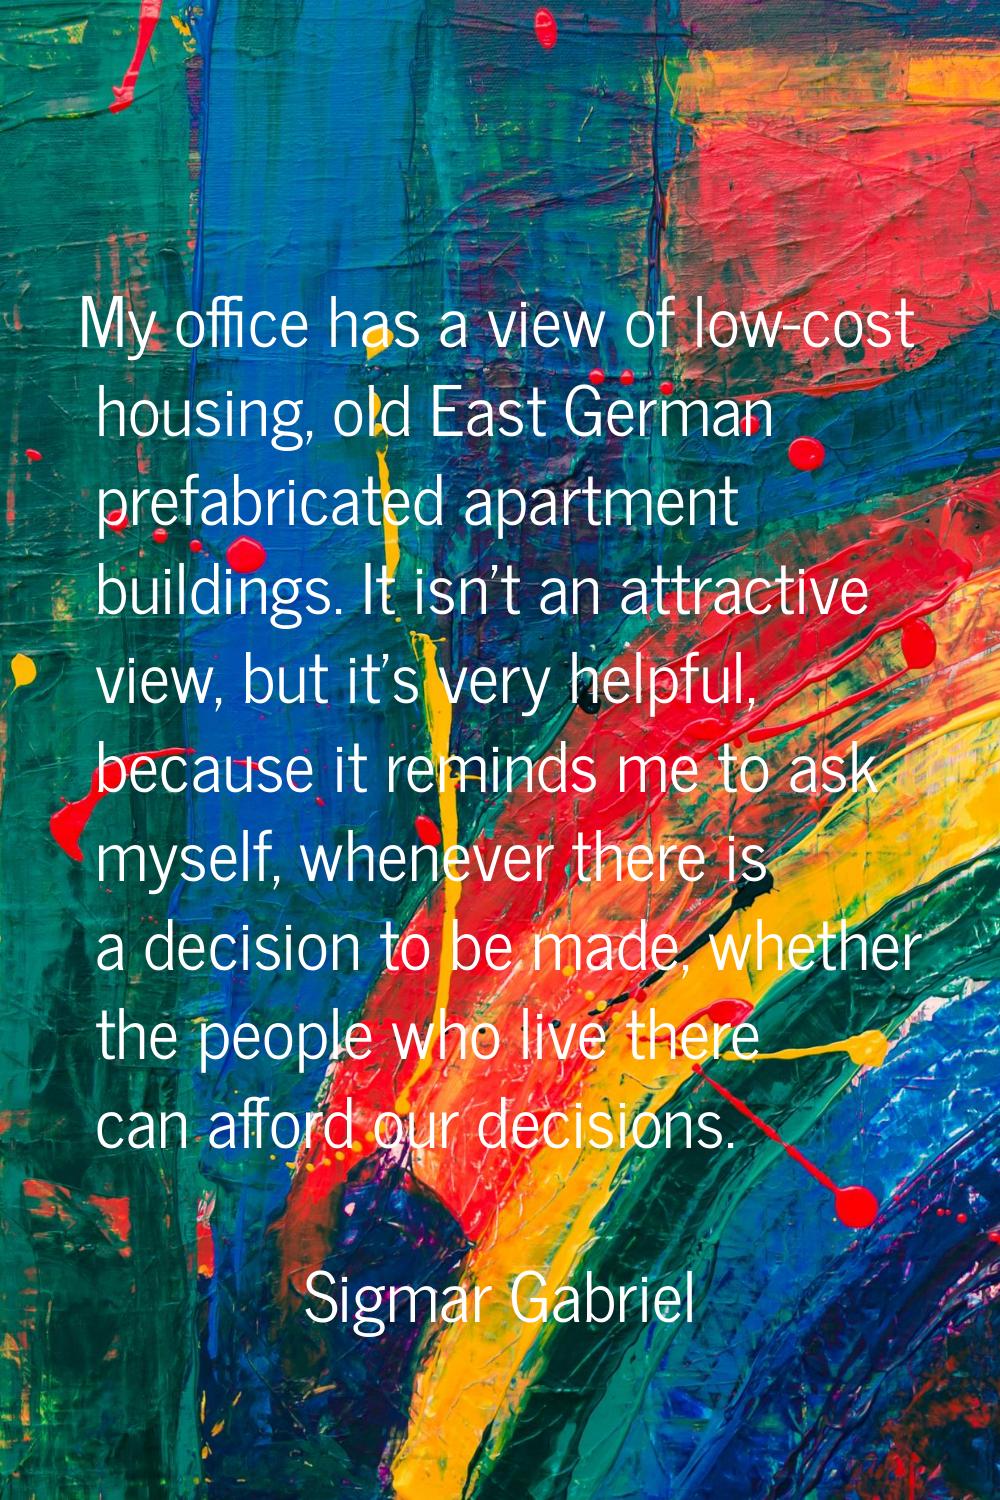 My office has a view of low-cost housing, old East German prefabricated apartment buildings. It isn